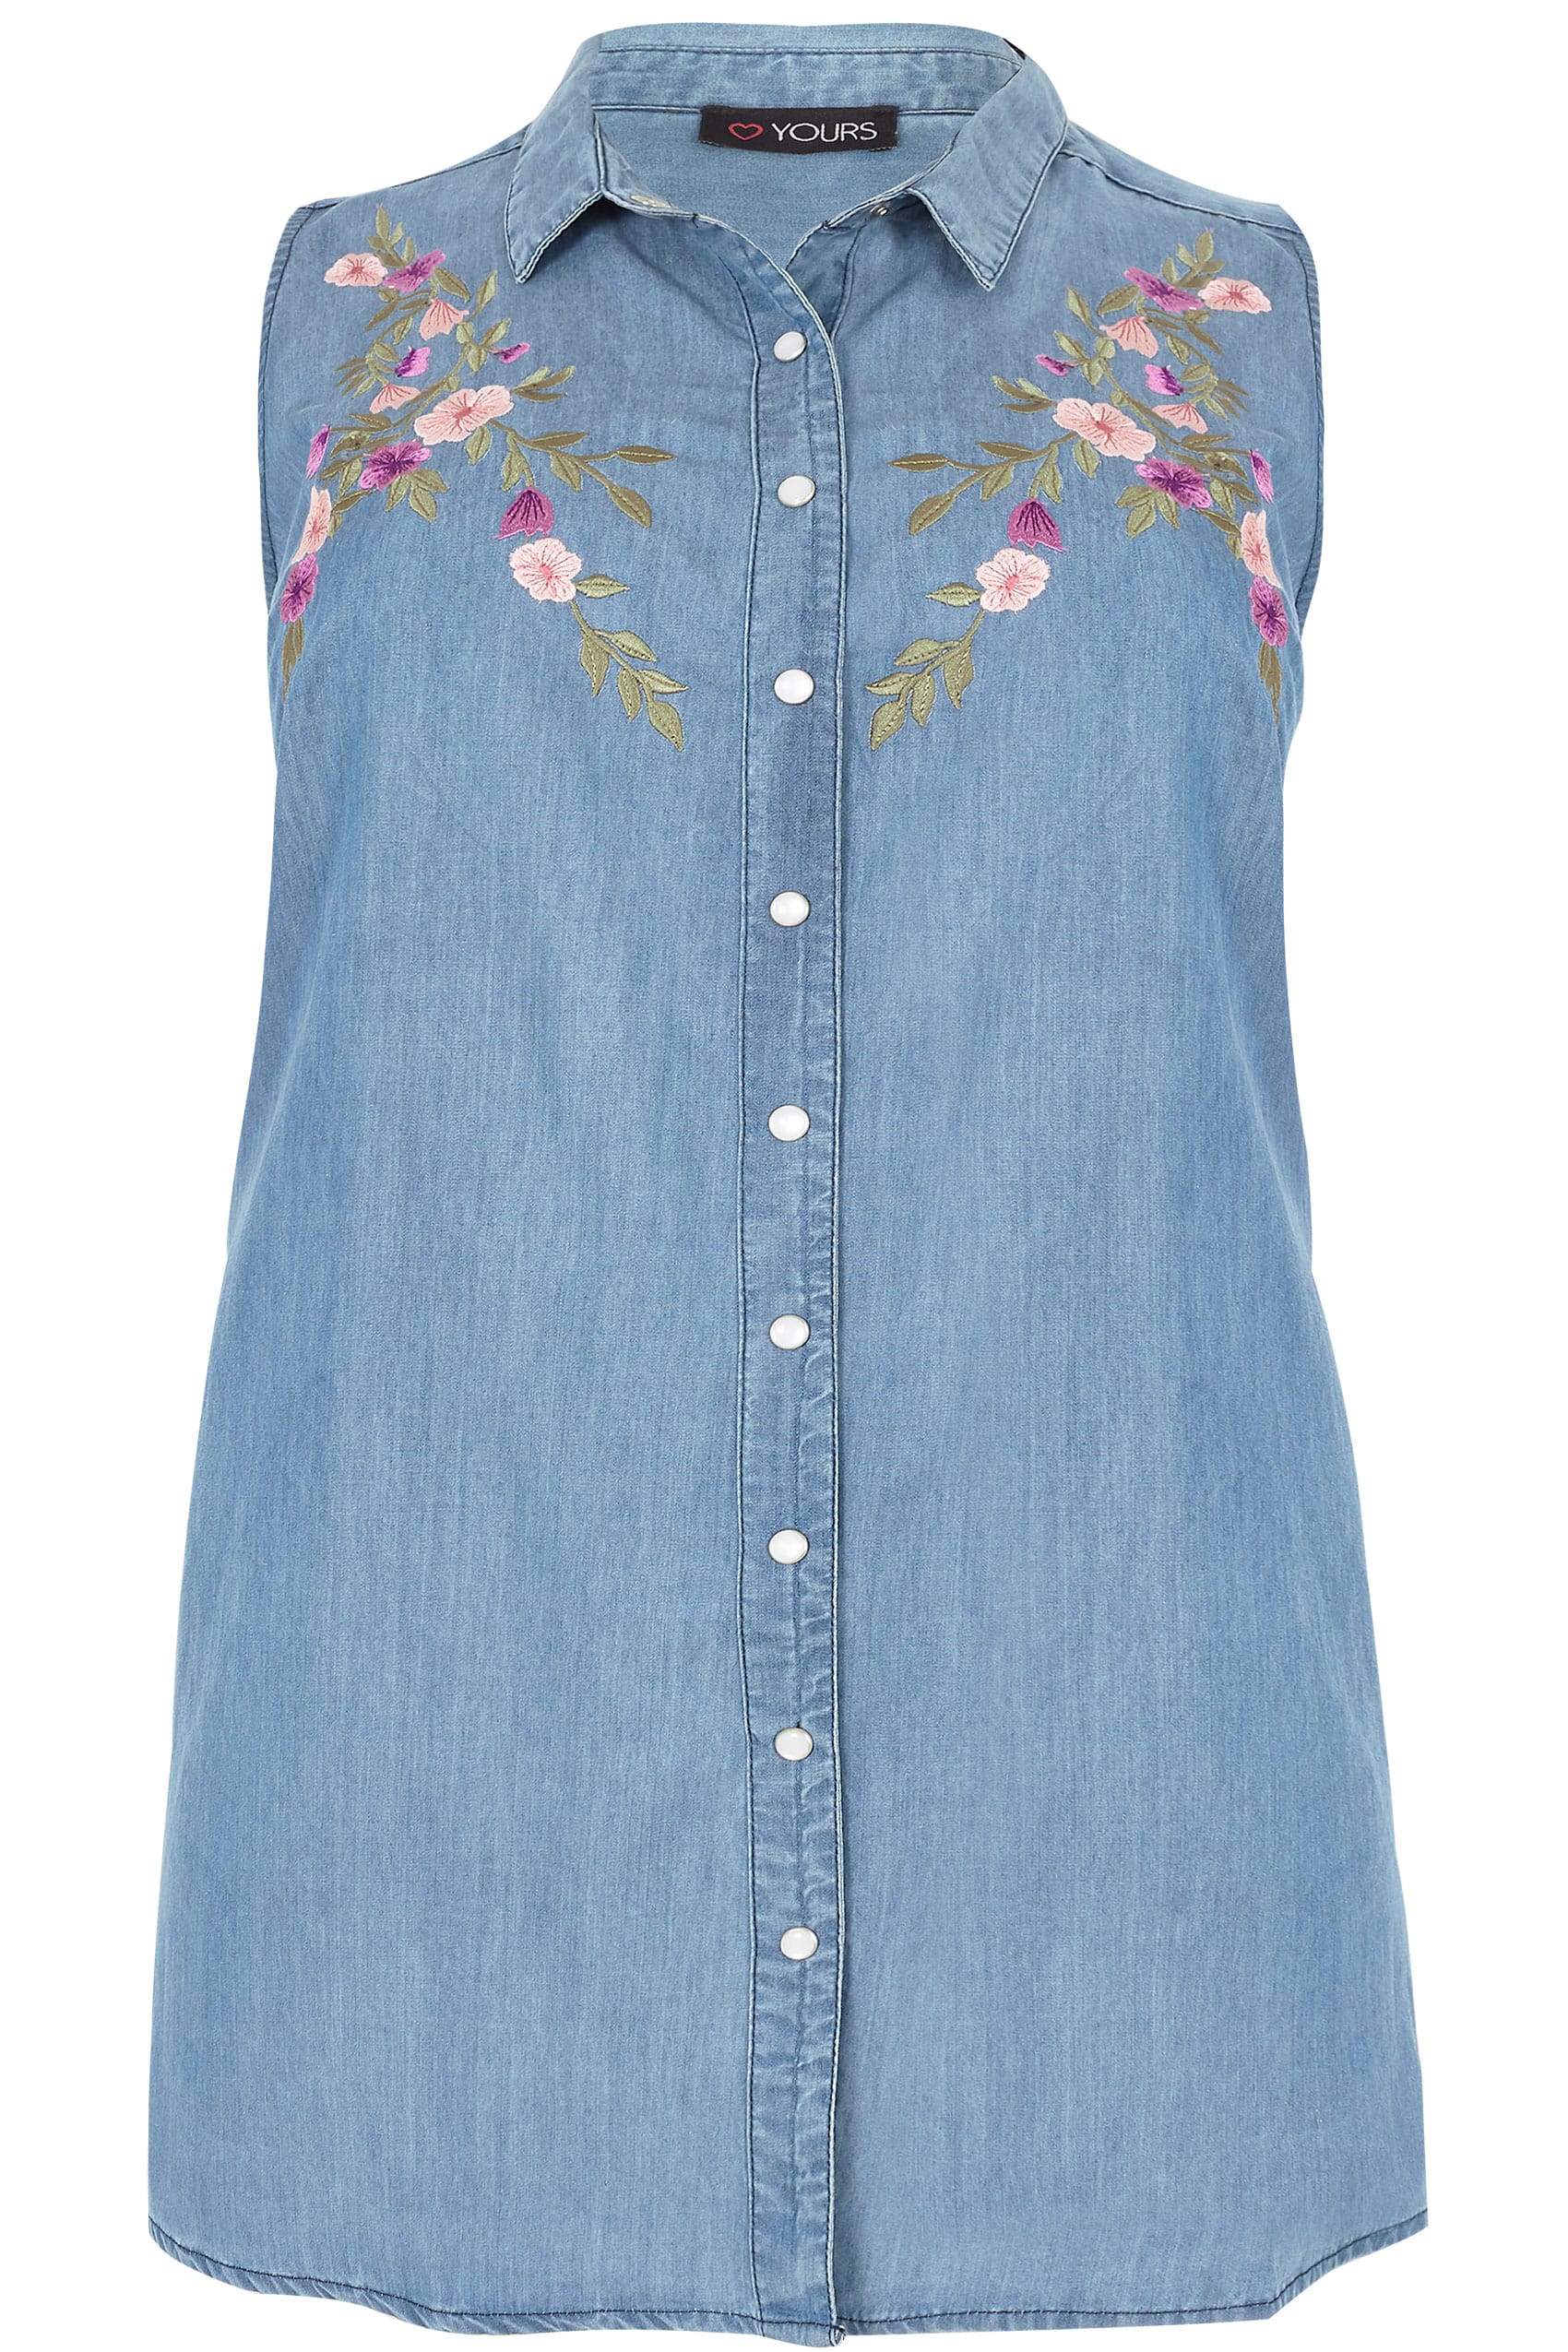 Blue Floral Embroidery Sleeveless Denim Shirt Plus Size 16 To 36